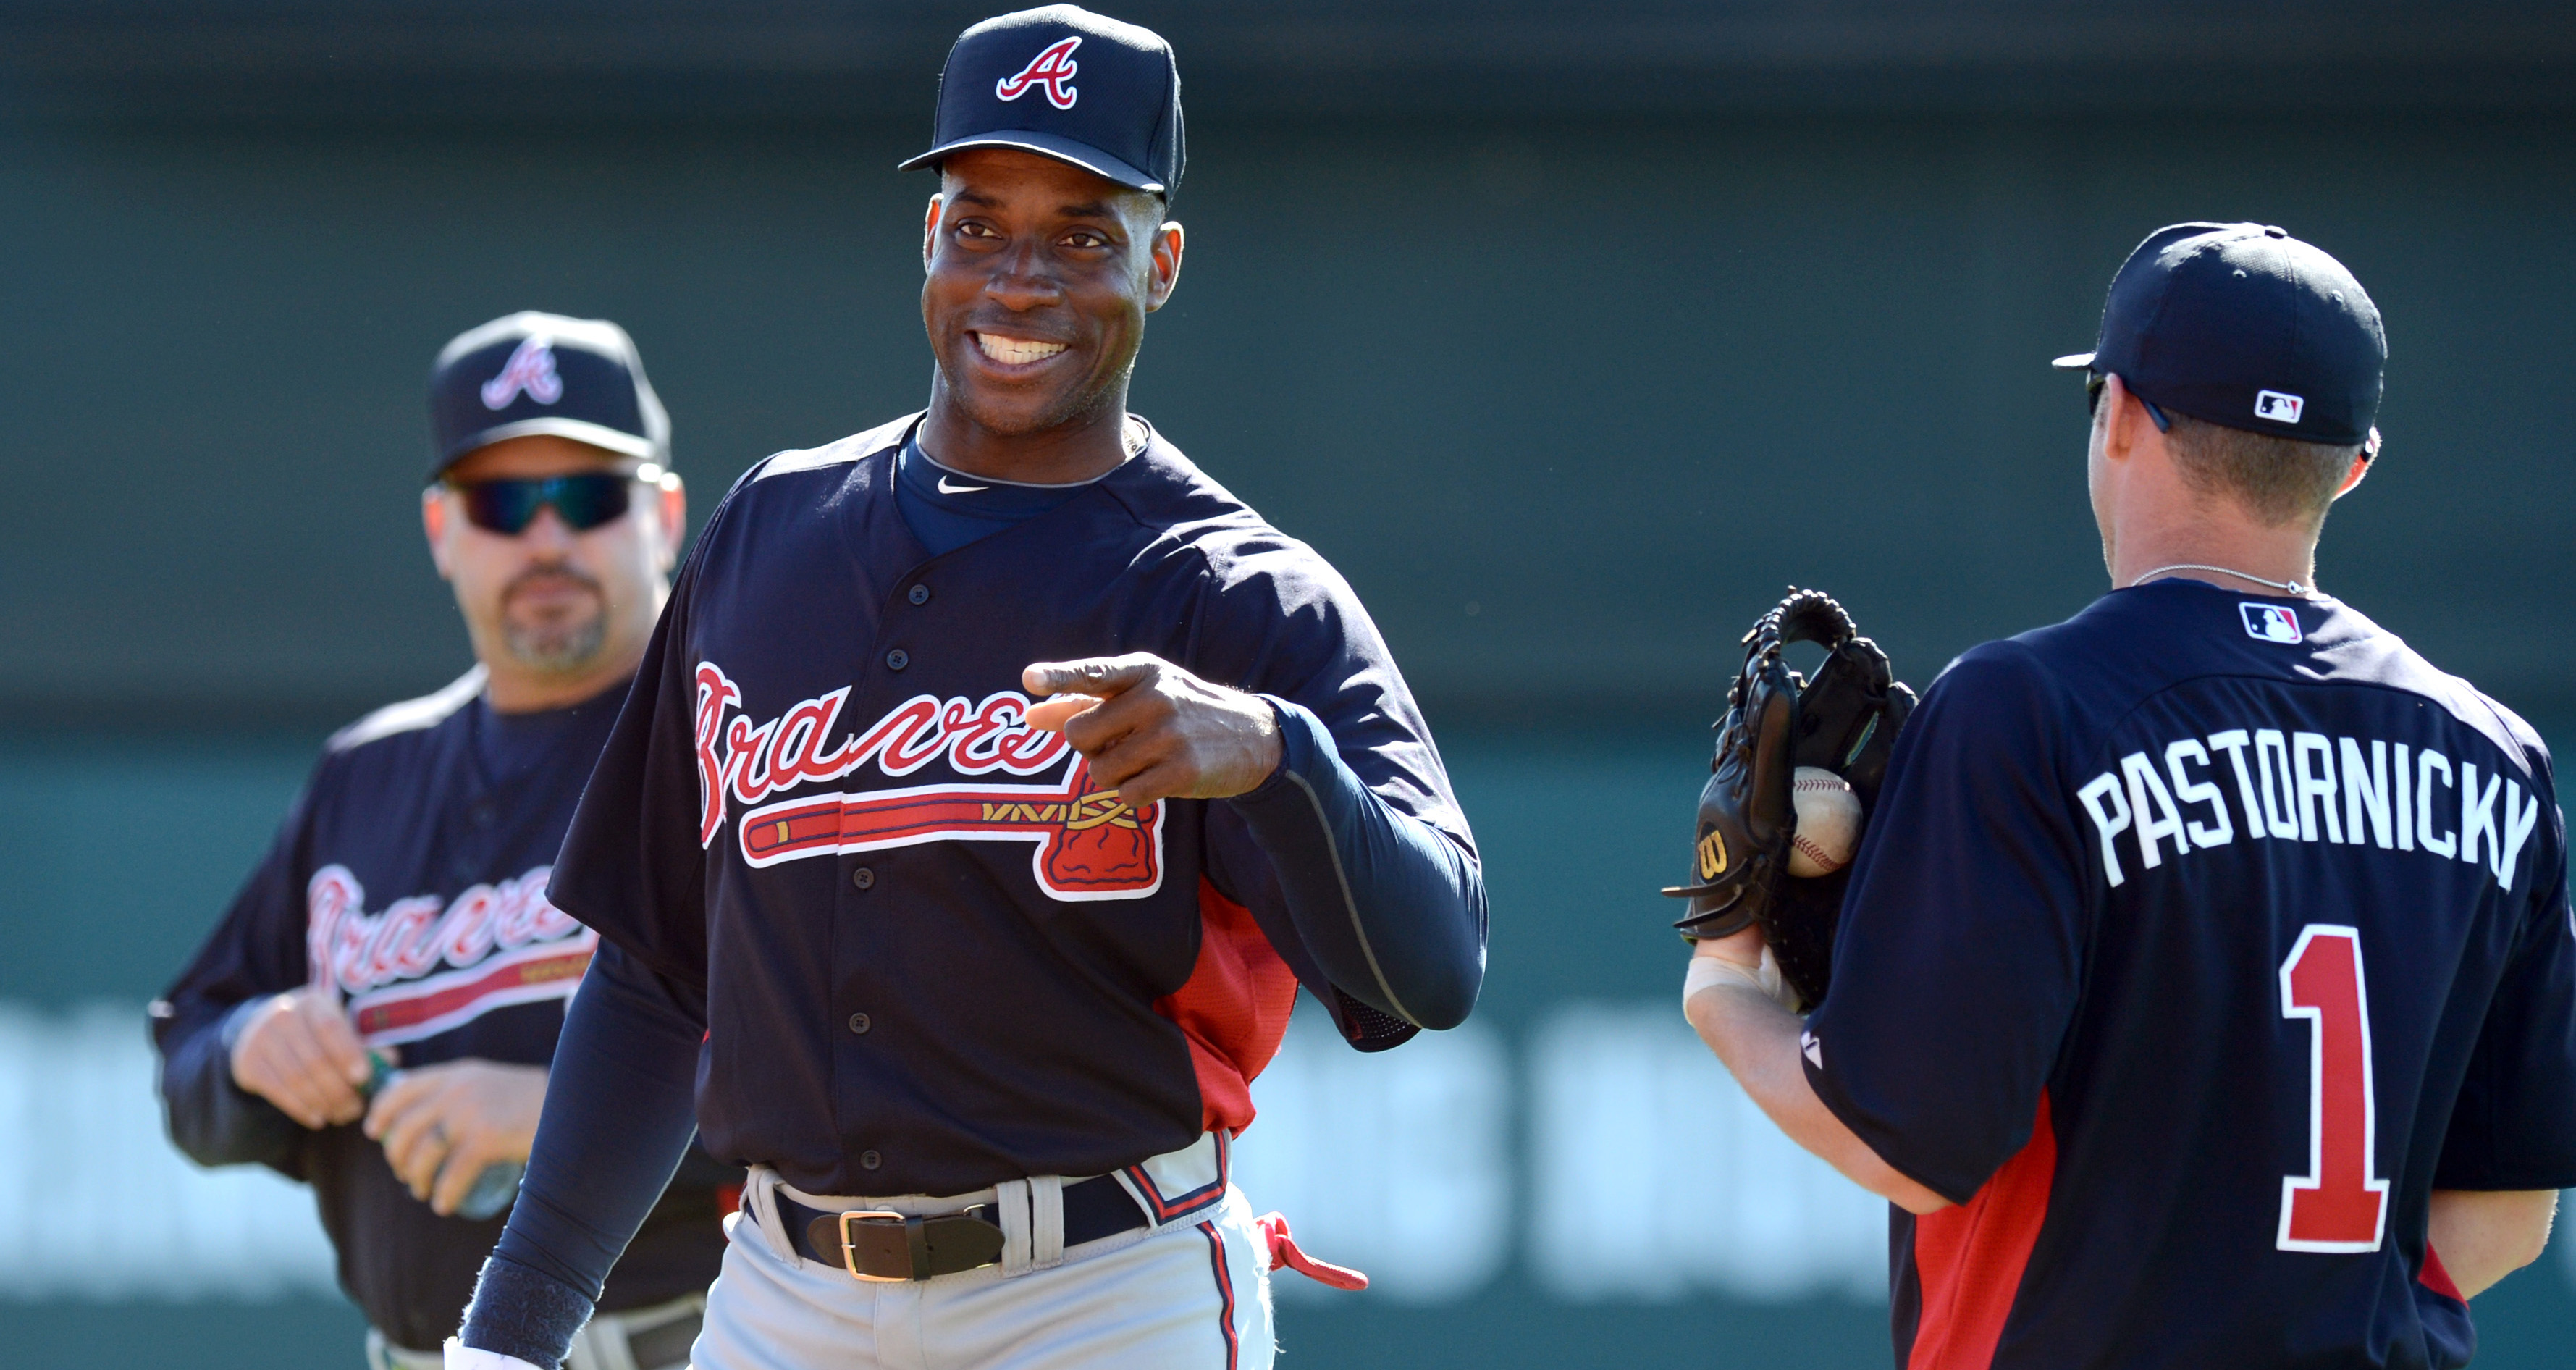 New Hall of Famer Fred McGriff throws first pitch at Blue Jays